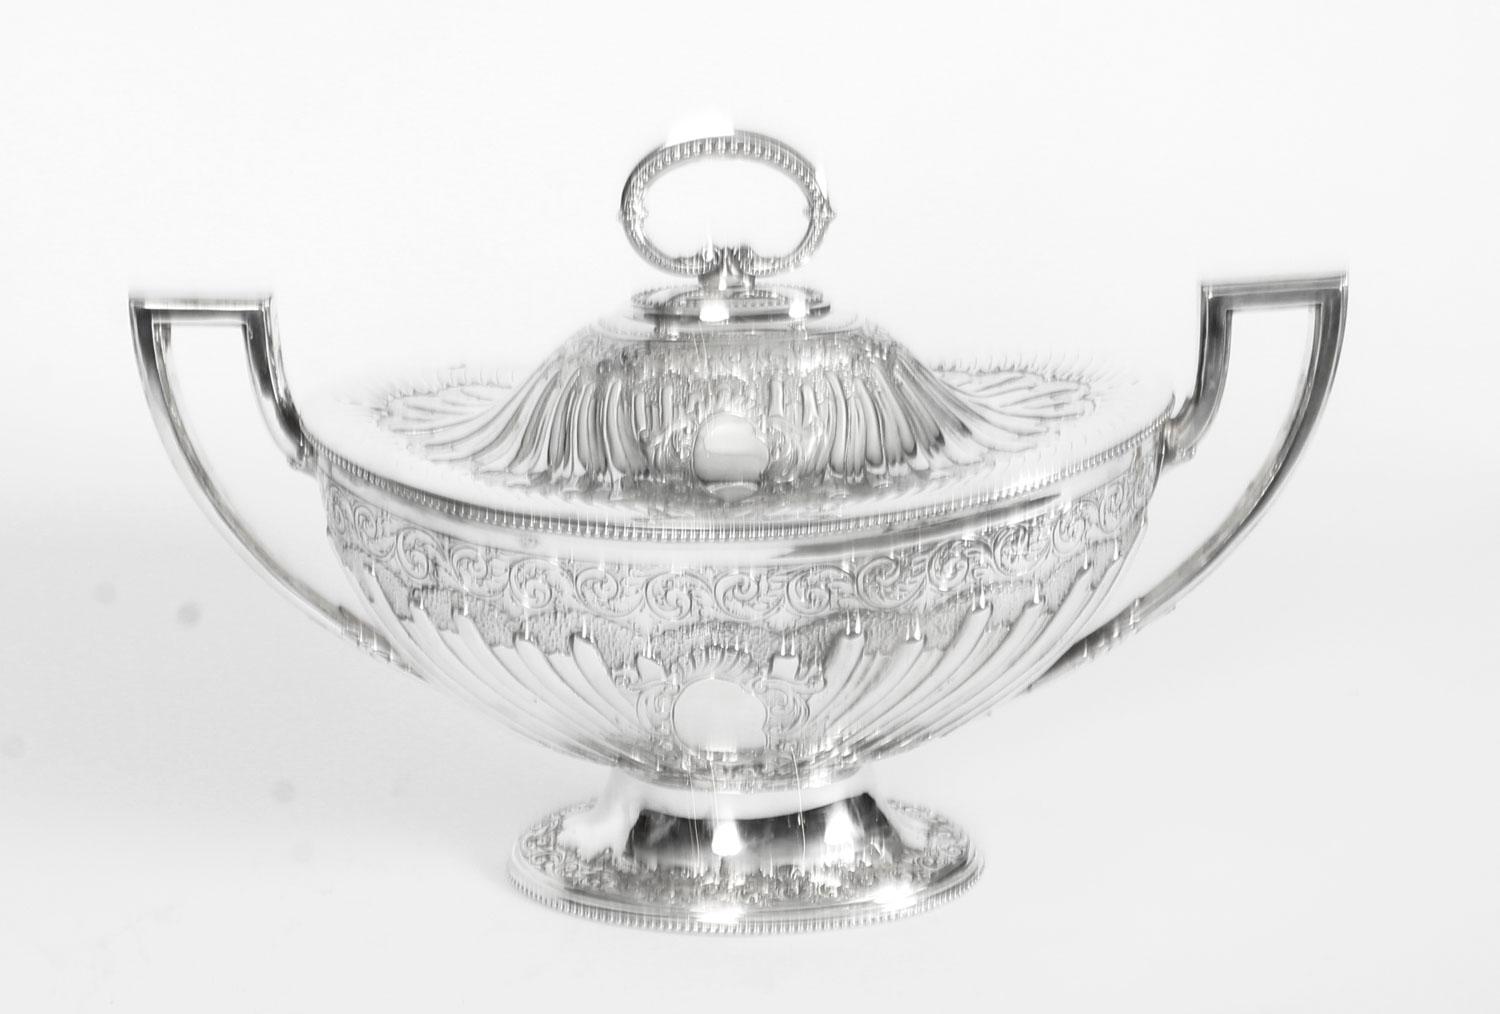 This is an exquisite antique English Victorian silver plated soup tureen, circa 1860 in date.
 
This splendid tureen is oval in shape with delightfully embossed foliate and fluted decoration. The handle is removable and has wonderful beaded